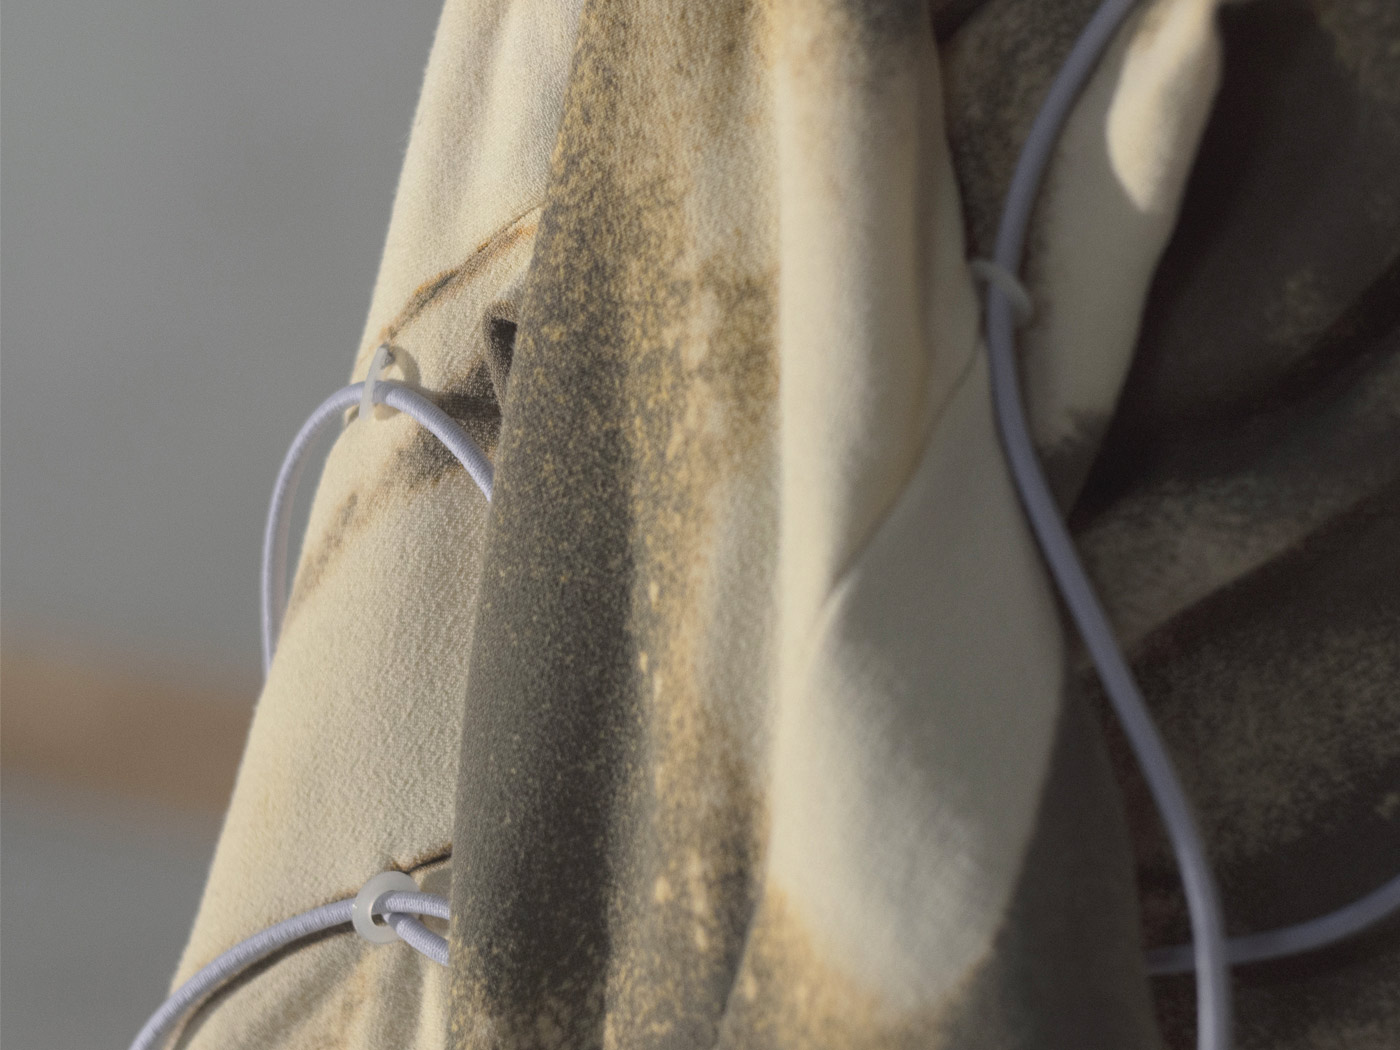 Close-up of the torso hanging from the pedestal. Transparent rings can be seen at the seams, through which the purple-colored cables that start at the neck guard run.